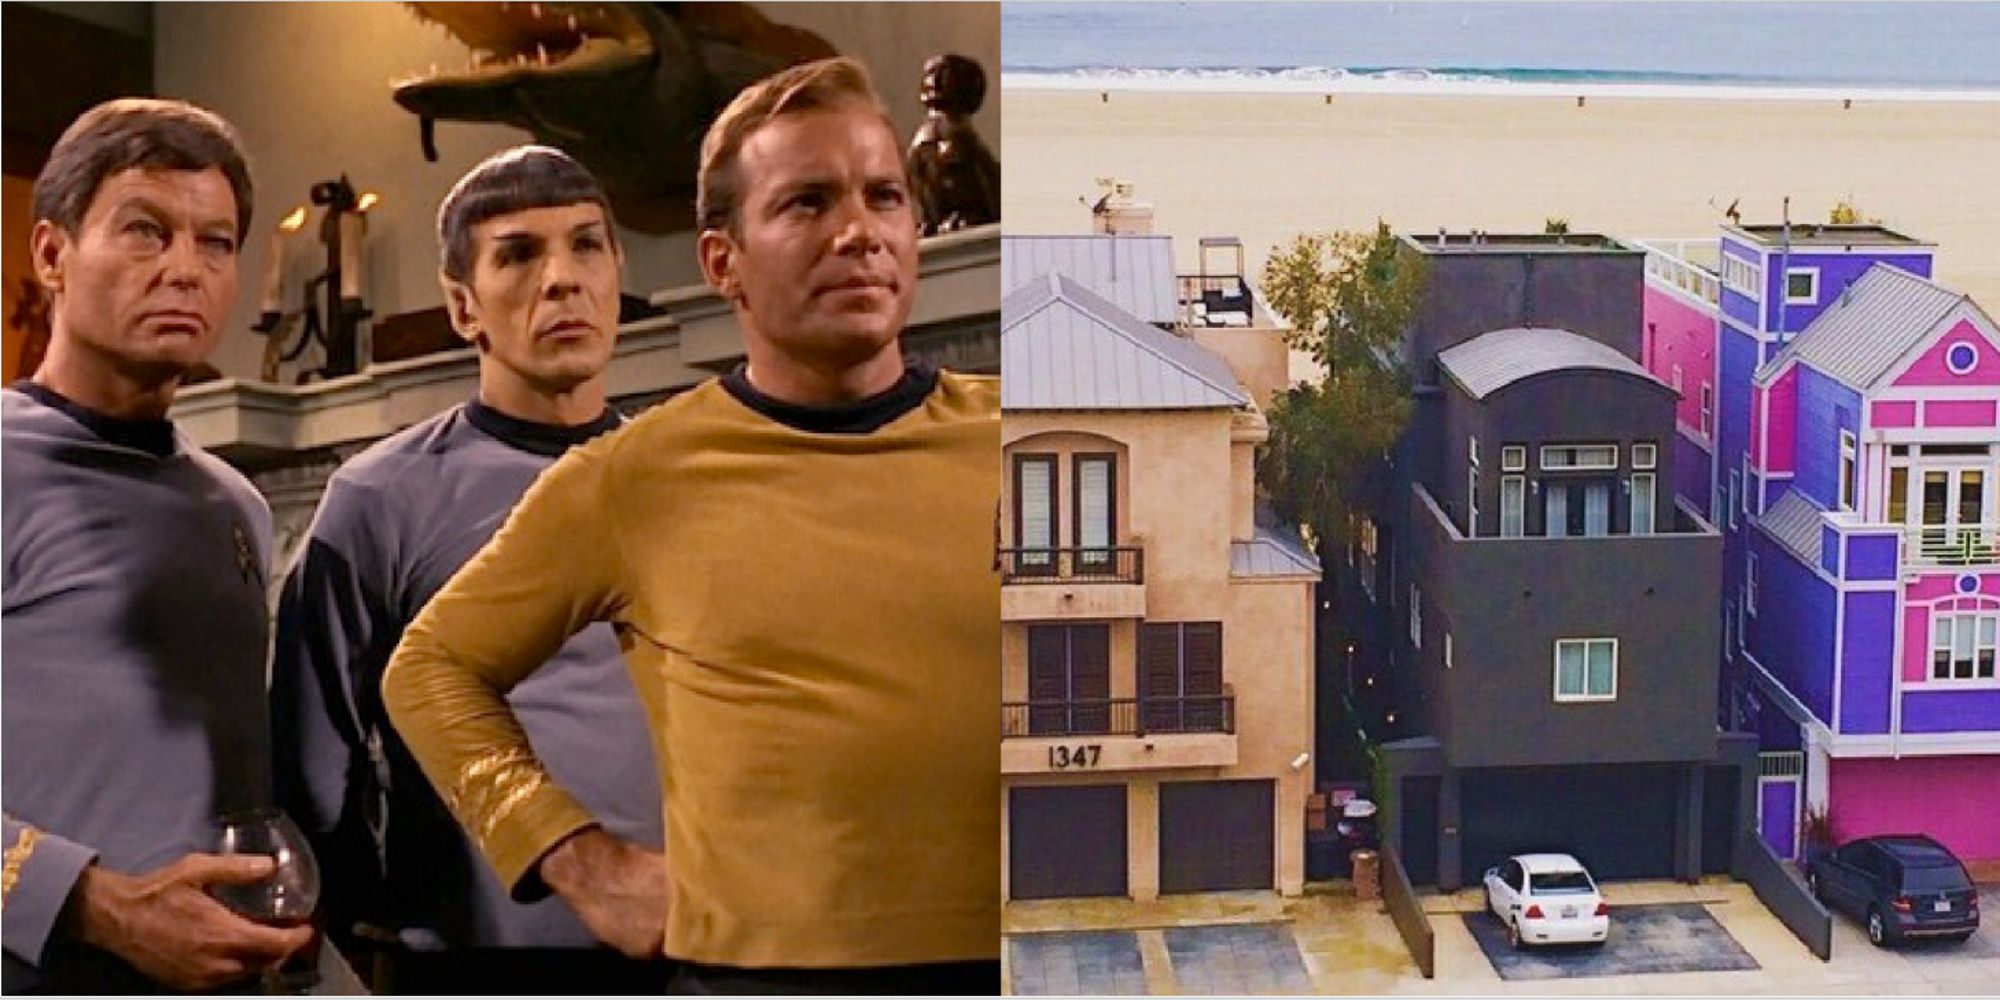 Star Trek: 10 Memes That Perfectly Sum Up The Kirk, Spock, And McCoy Dynamic